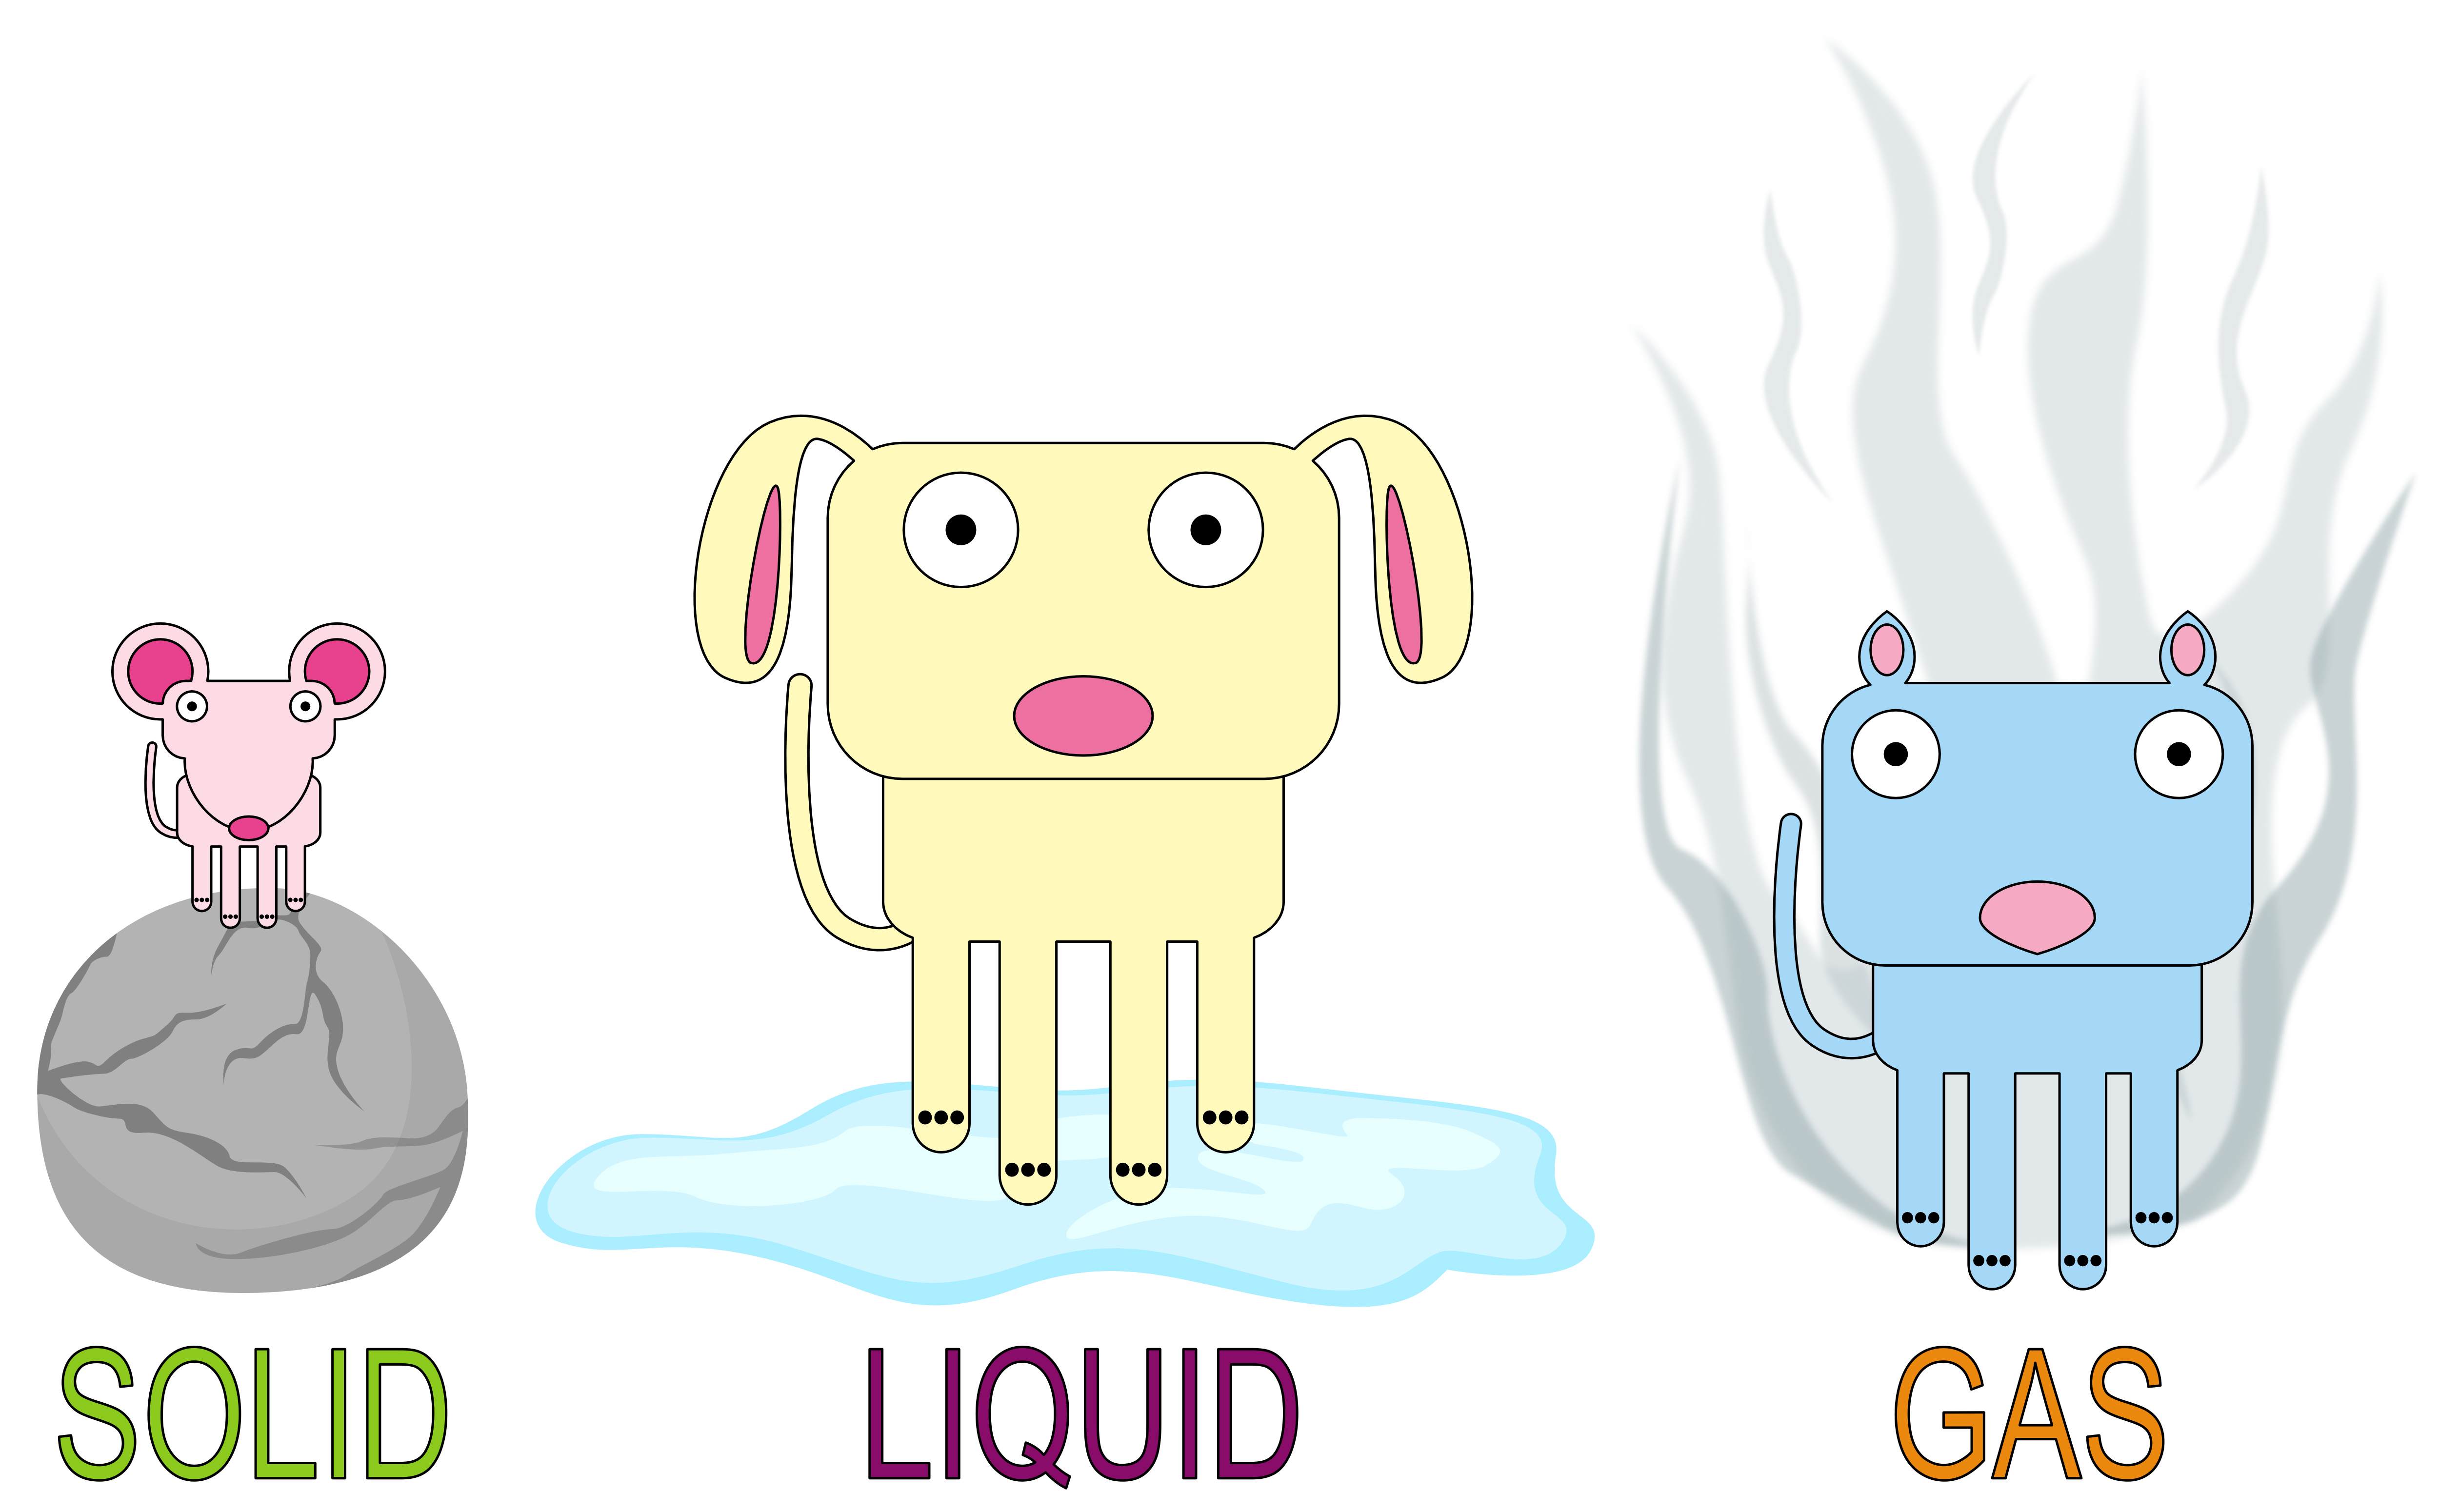 Free Cliparts Solid-Liquid Gas, Download Free Cliparts Solid-Liquid Gas